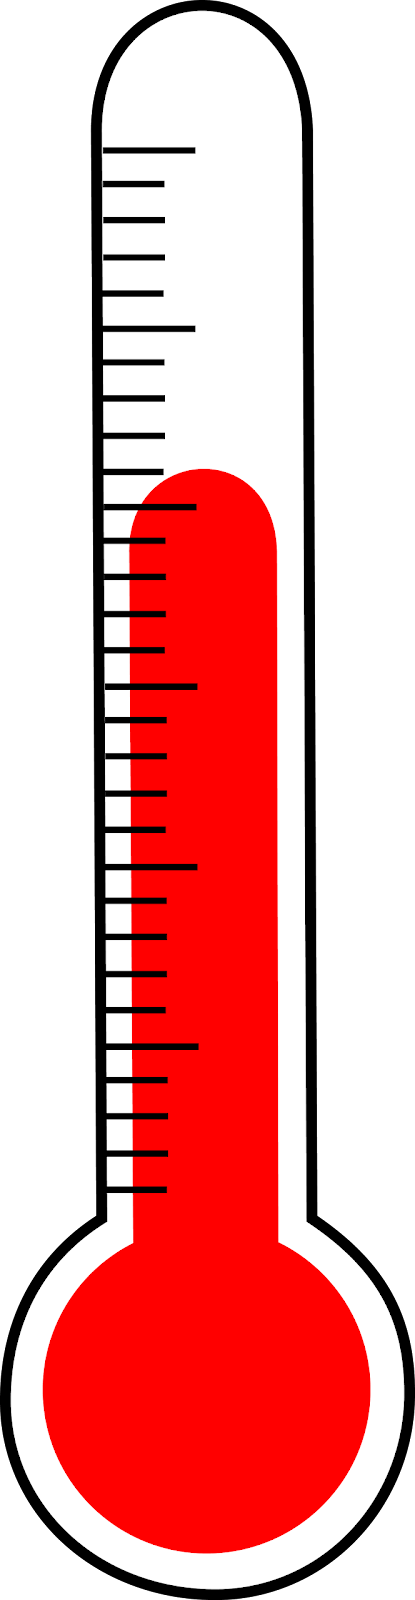 thermometer-clip-art-medical_red_thermometer_1.png